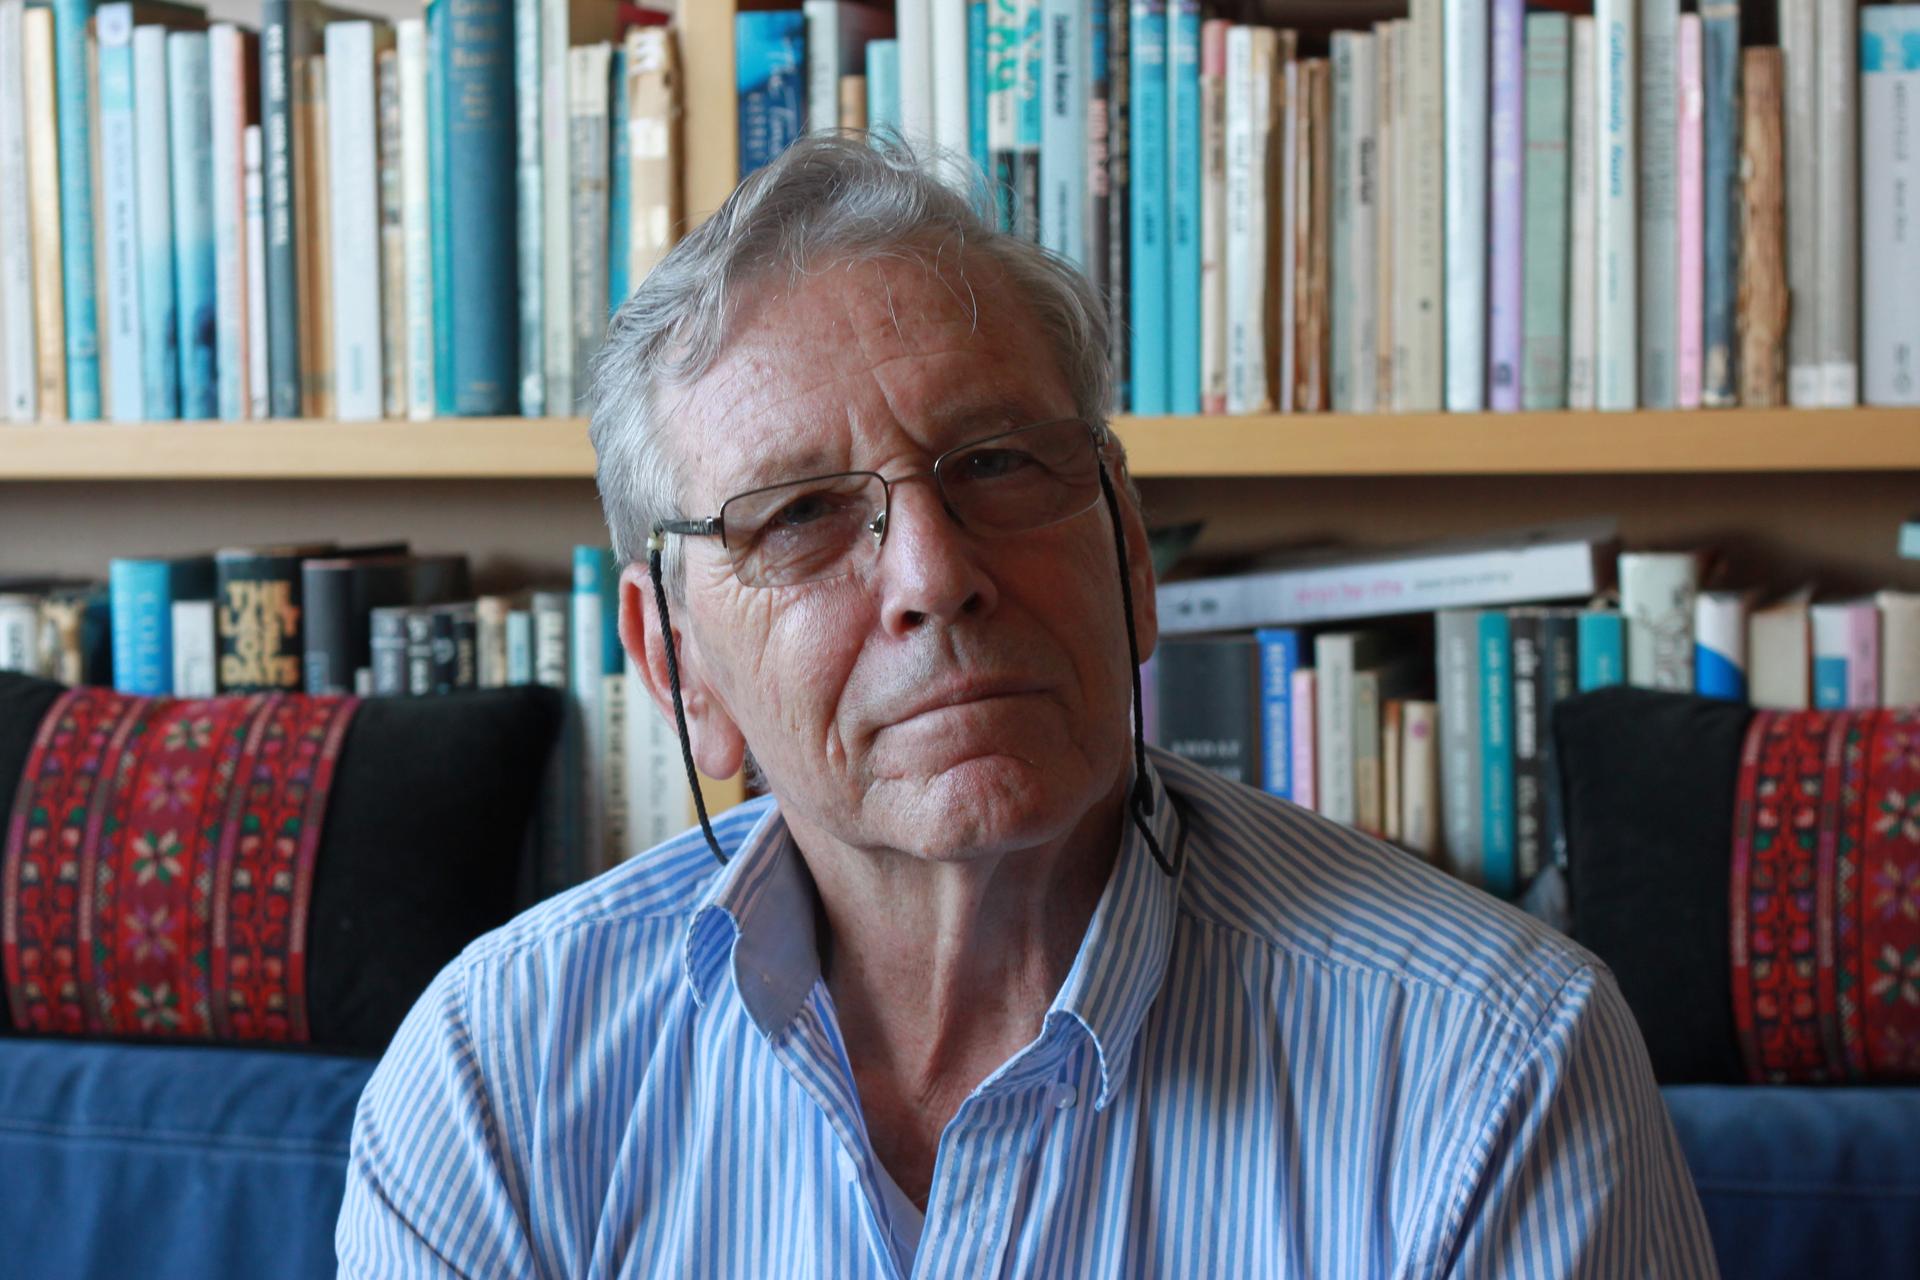 Amos Oz in his Tel Aviv apartment. His bestselling memoir, "A Tale of Love and Darkness," is on the bookshelf behind him, translated into more than two dozen languages.